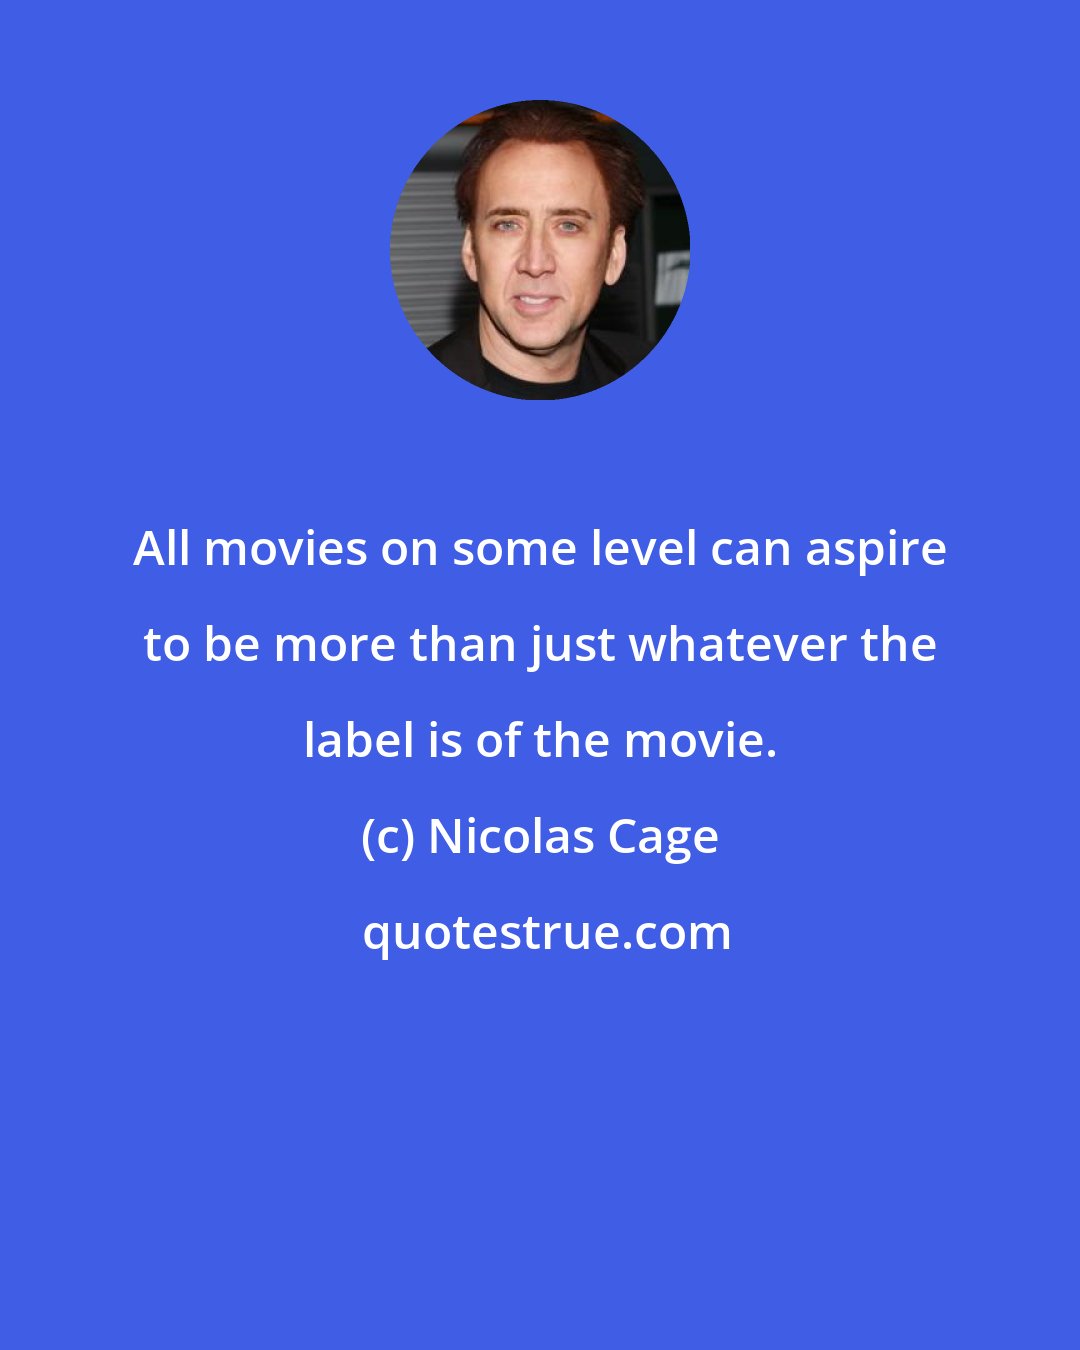 Nicolas Cage: All movies on some level can aspire to be more than just whatever the label is of the movie.